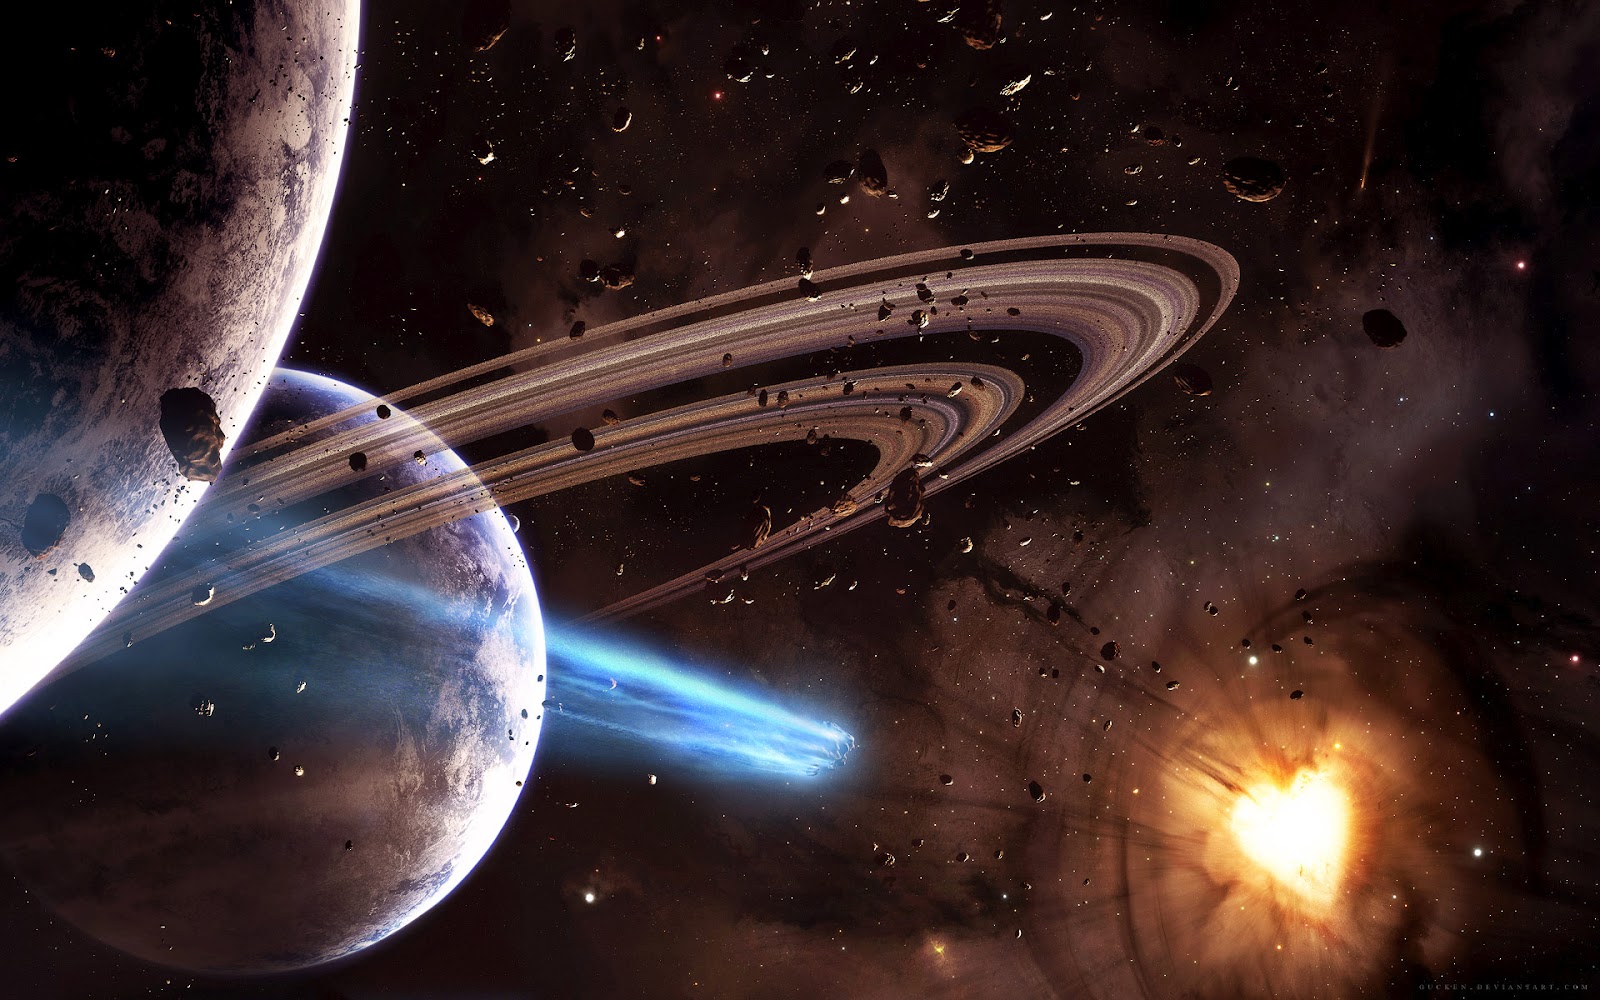 Top 34 Most Incredible And Amazing Space Wallpapers In HD - For More